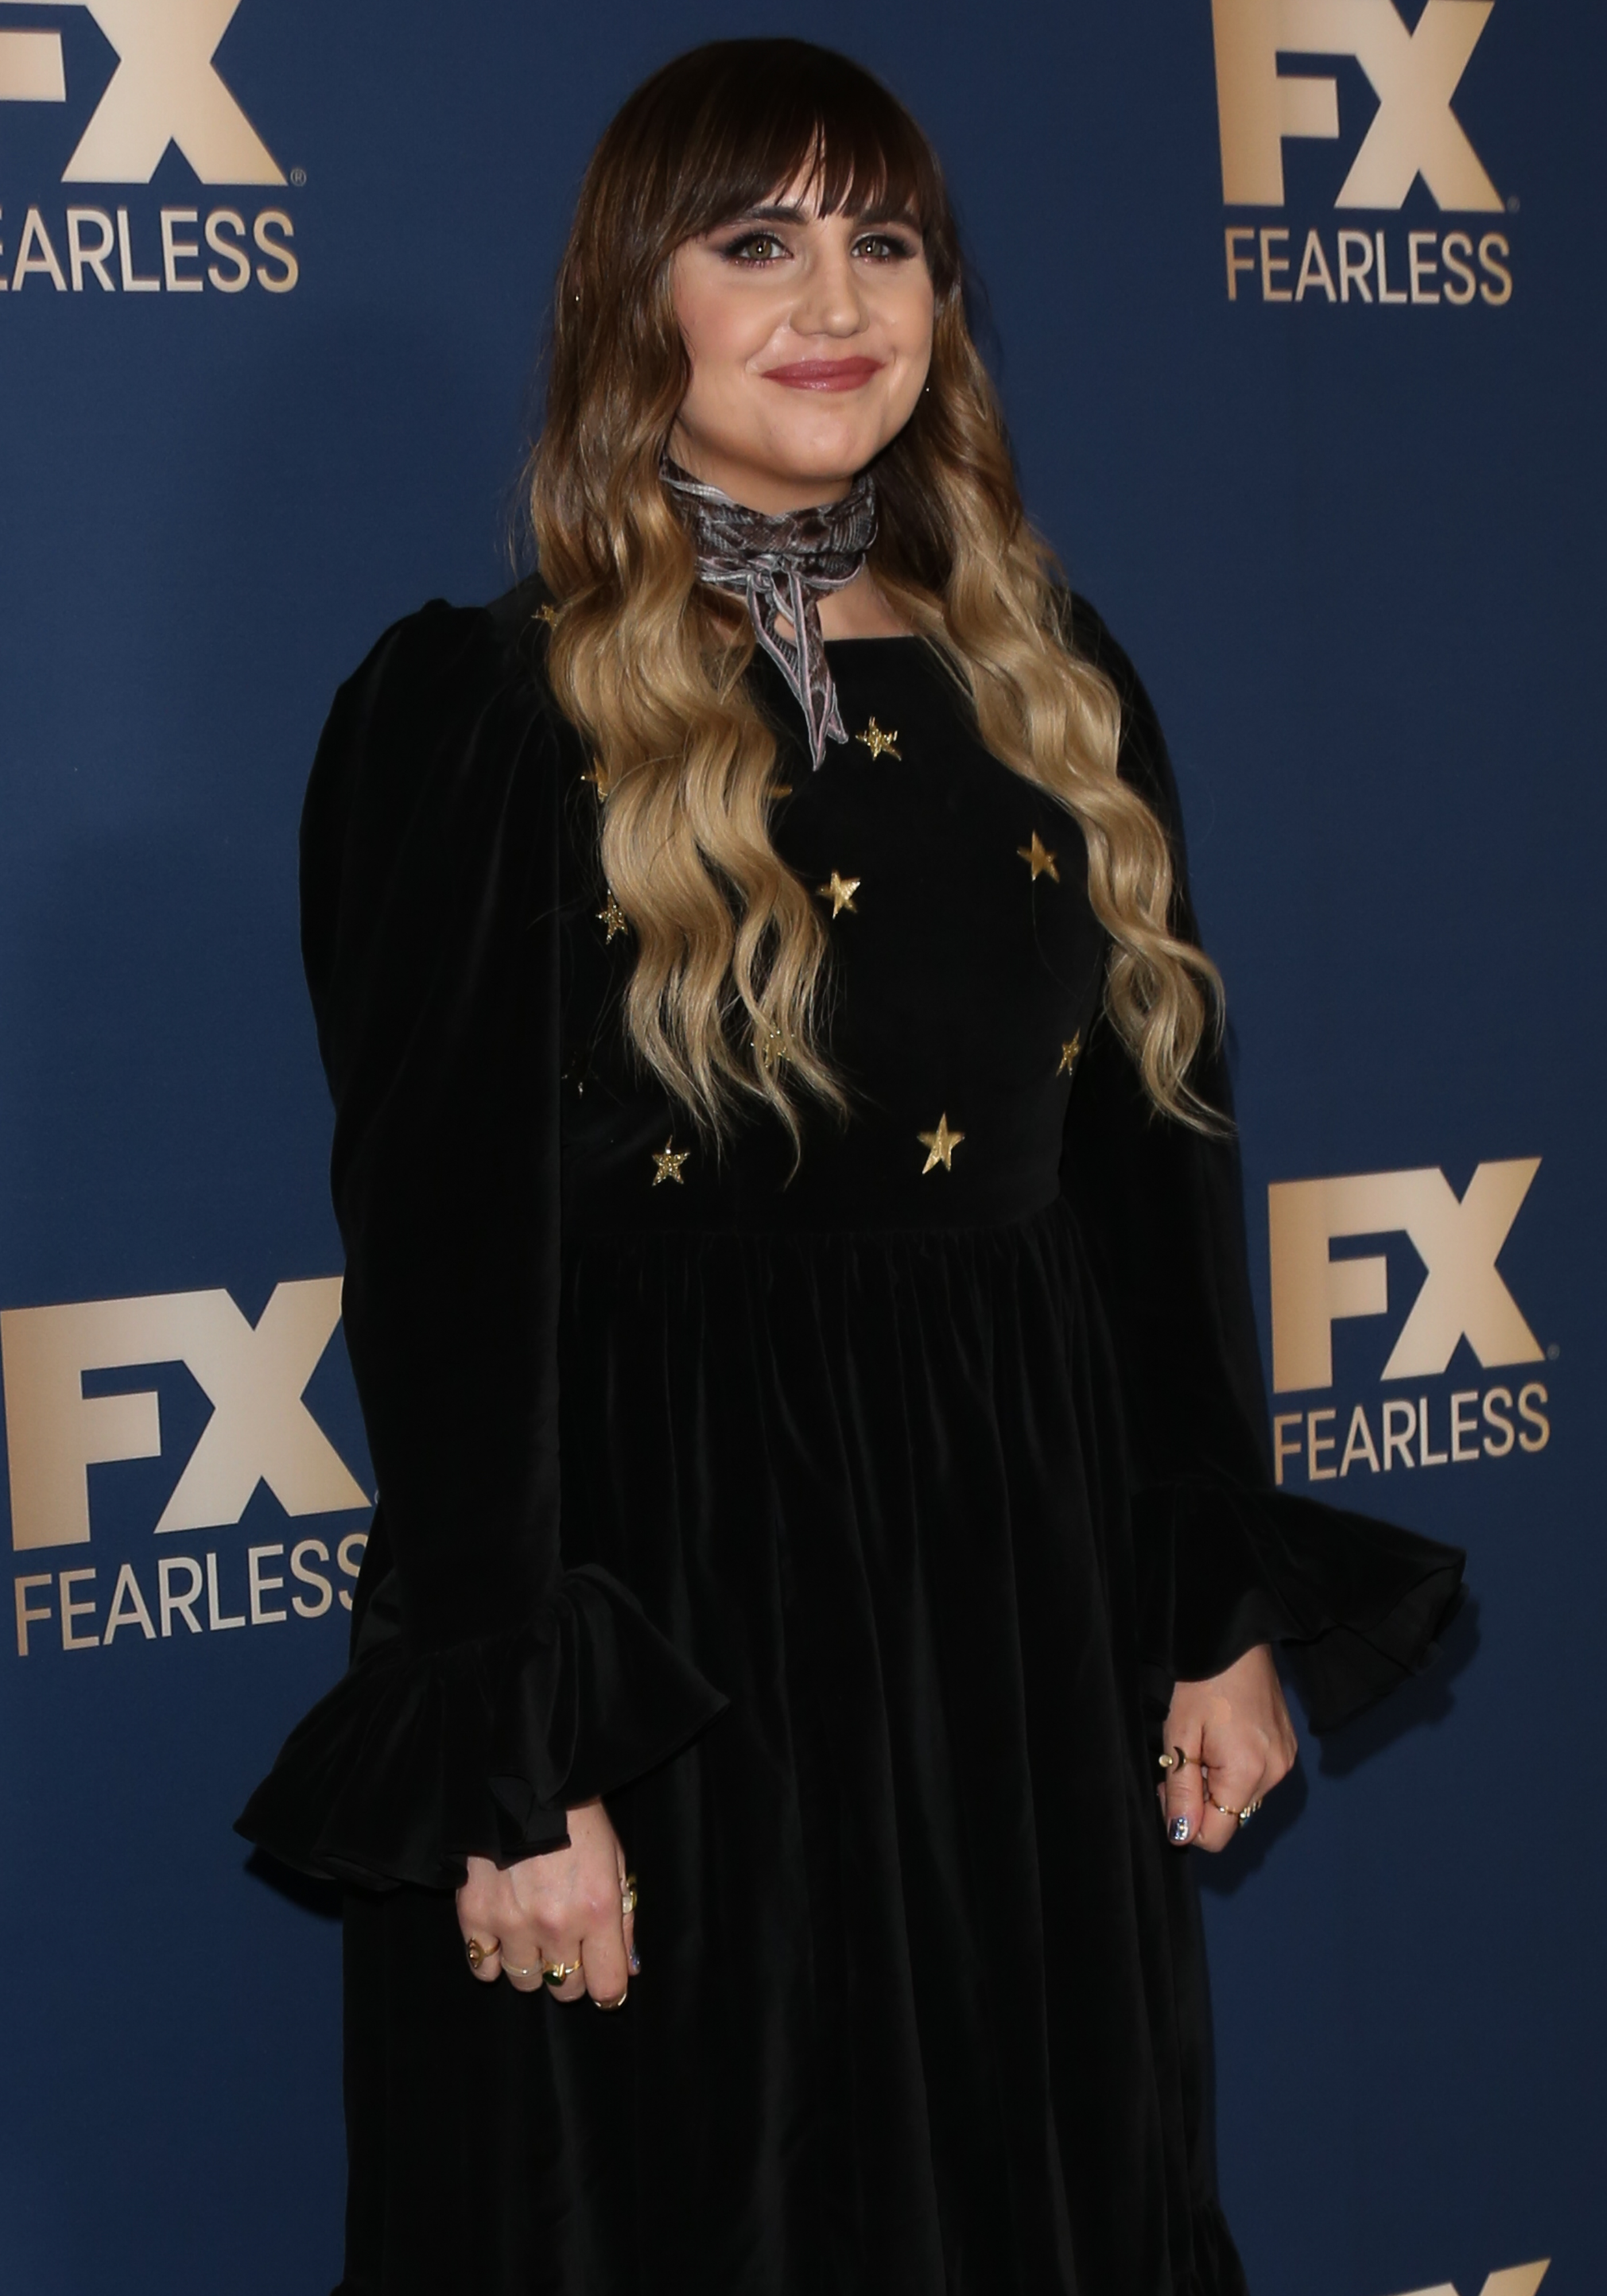 Natasia Demetriou attends FX Networks' Star Walk Winter Press Tour 2020 at The Langham Huntington, Pasadena on January 9, 2020, in Pasadena, California. | Source: Getty Images